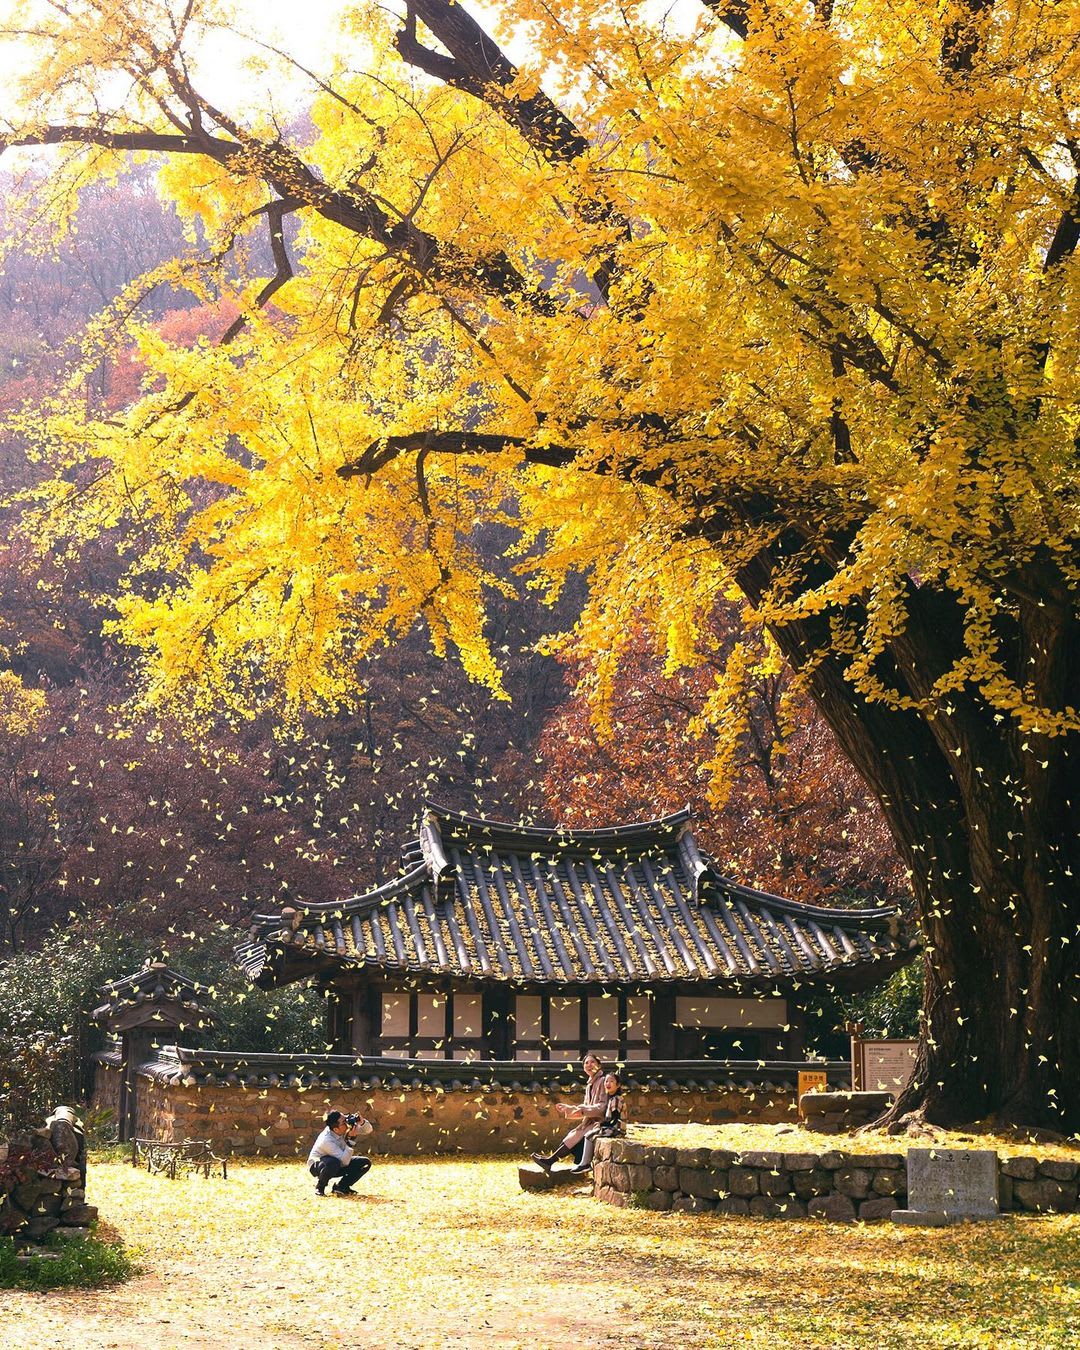 400-year-old ginkgo tree shedding its leaves in Ungok Seowon, a 18th century Confucian institution in historic Gyeongju, North Gyeongsang Province, South Korea.